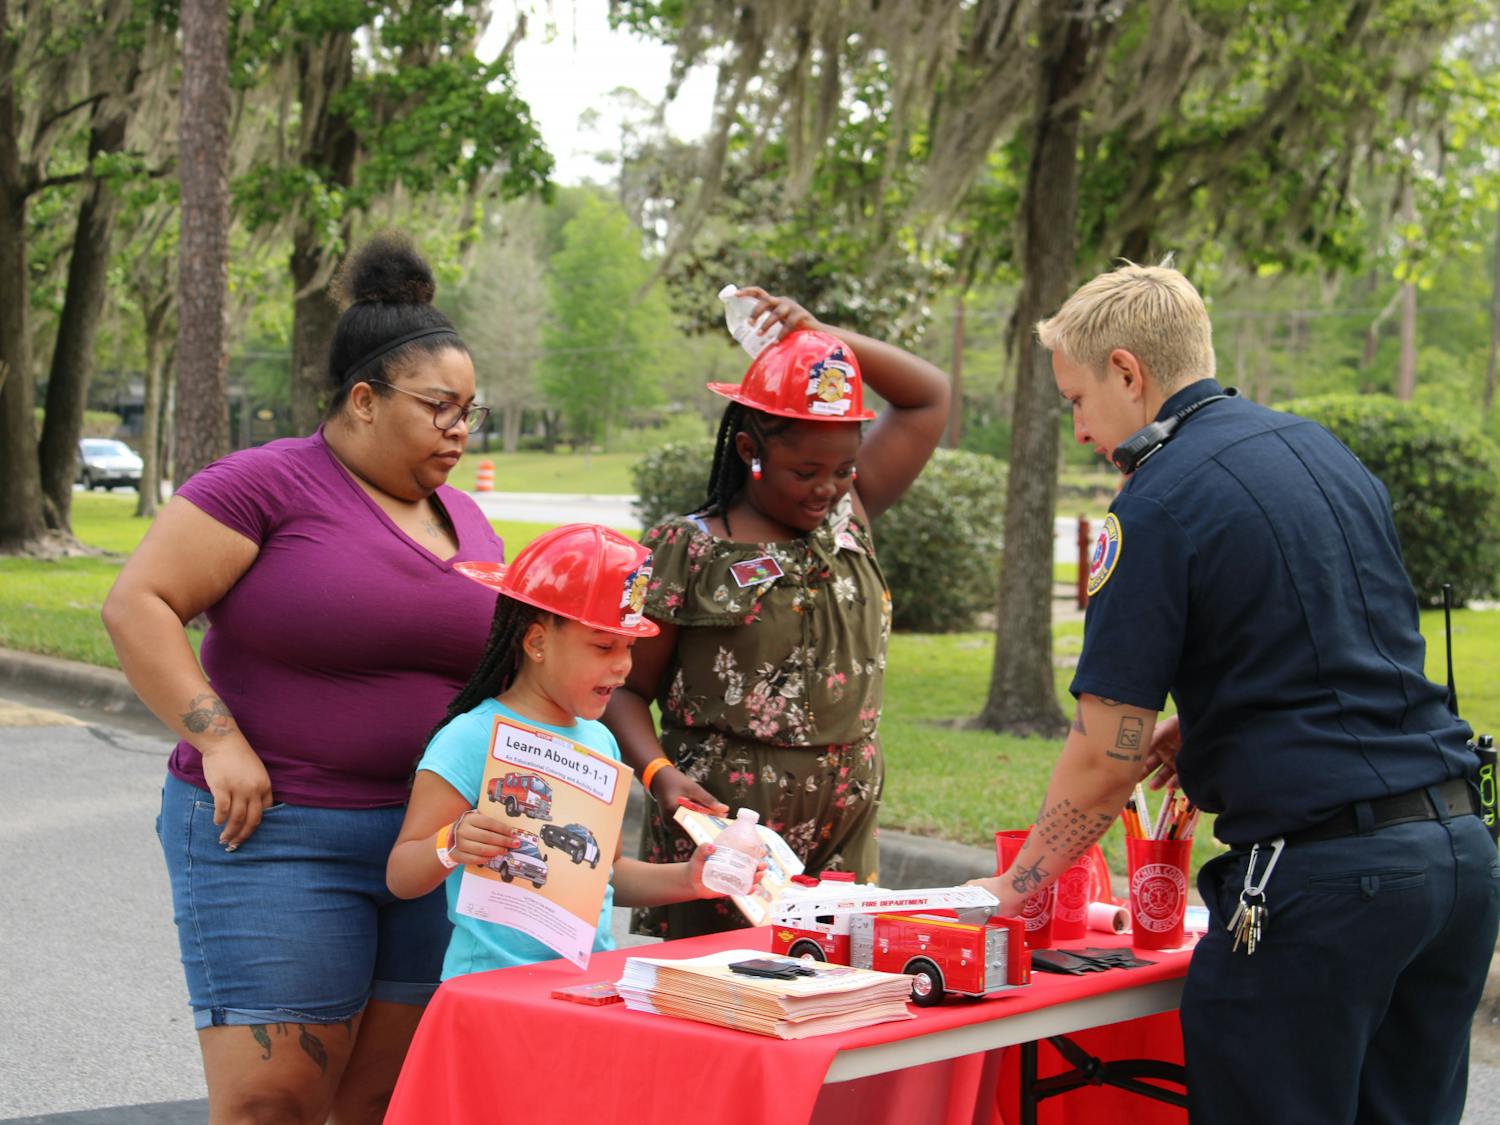 Autumn Anderson, 6, and Taylar Cook, 9, talk to firefighter Zoe Siemienskil at the Bike Rodeo, Safety and Health Fair hosted by UF Health Shands Children’s Hospital on Saturday, March 25, 2023.